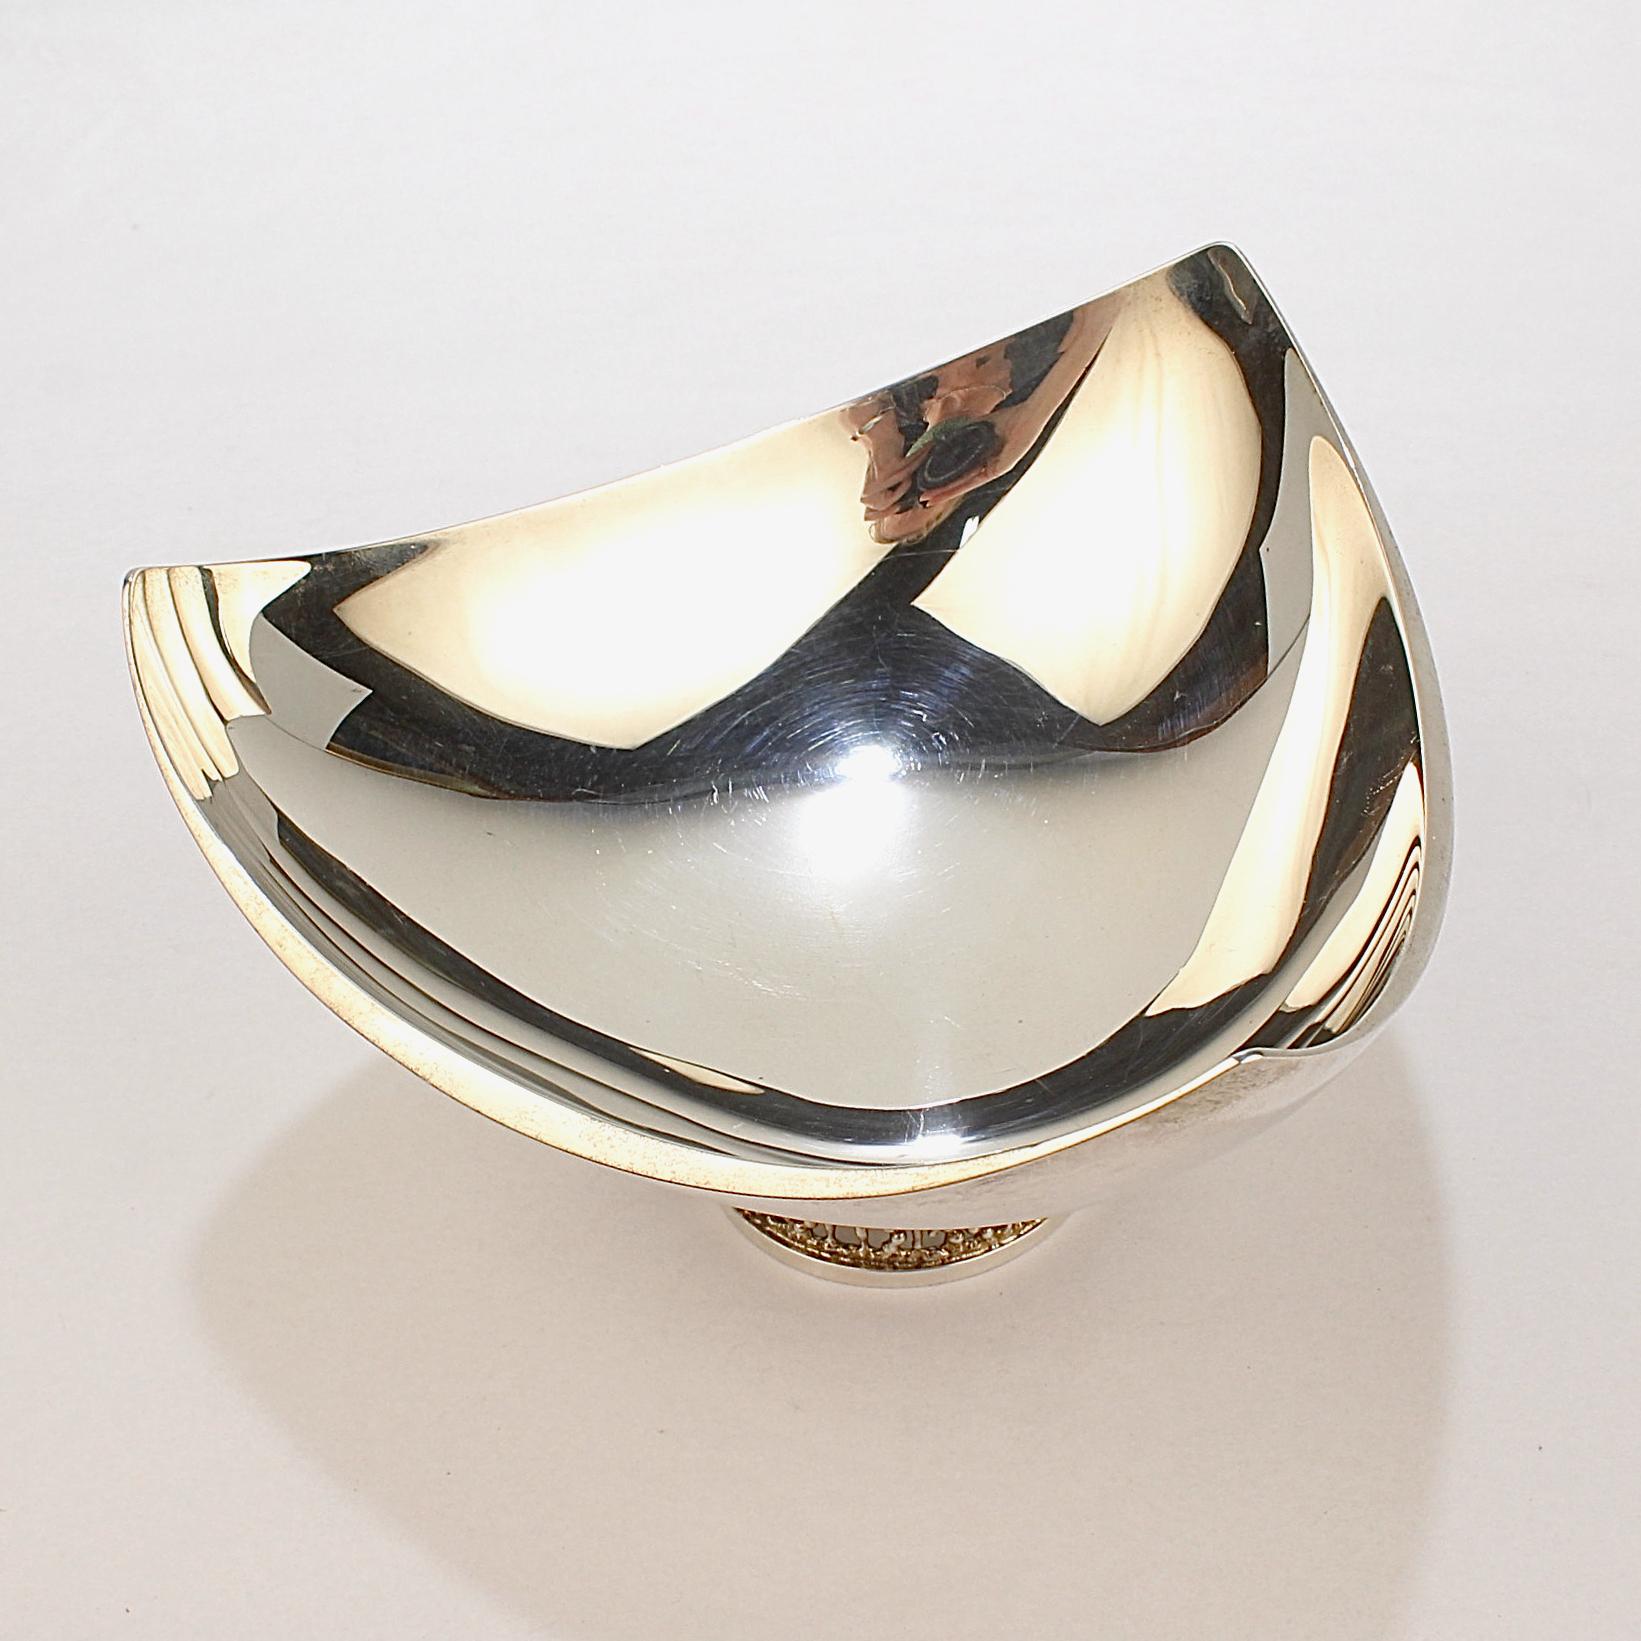 English 1980's Modernist Caryatic Sterling Silver Bowl by Stuart Devlin For Sale 3